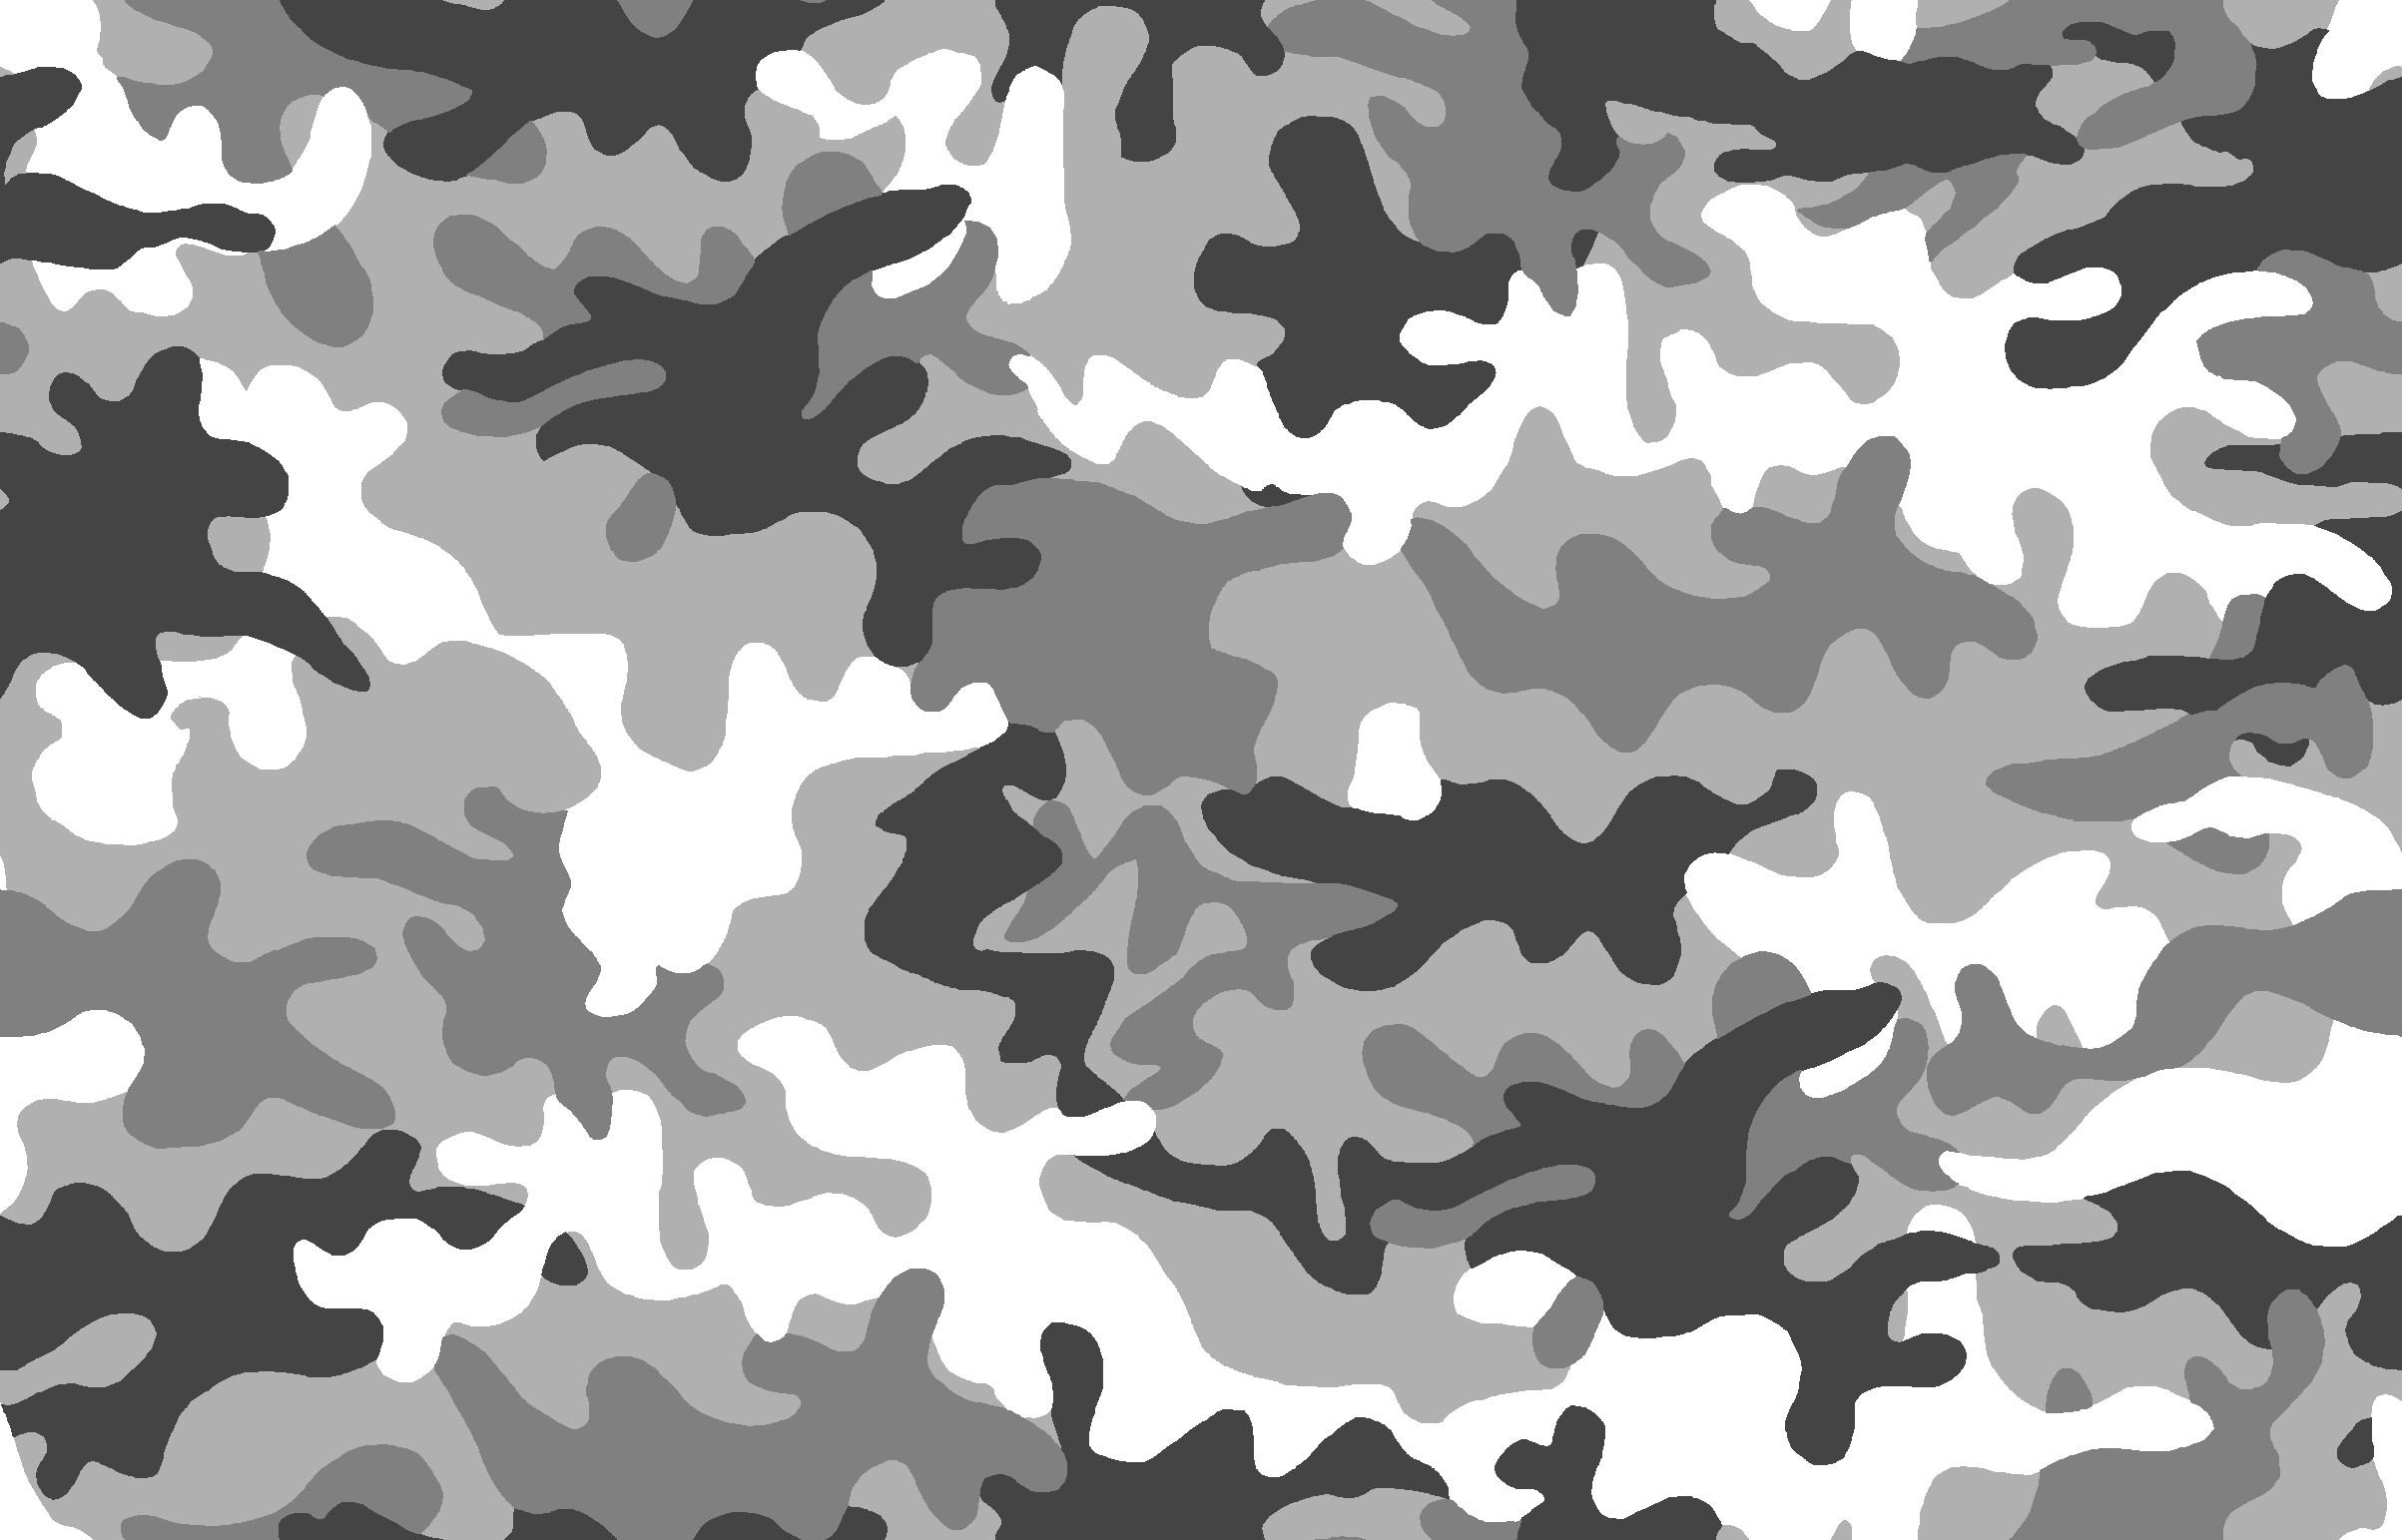 camouflage wallpaper,military camouflage,pattern,camouflage,uniform,clothing